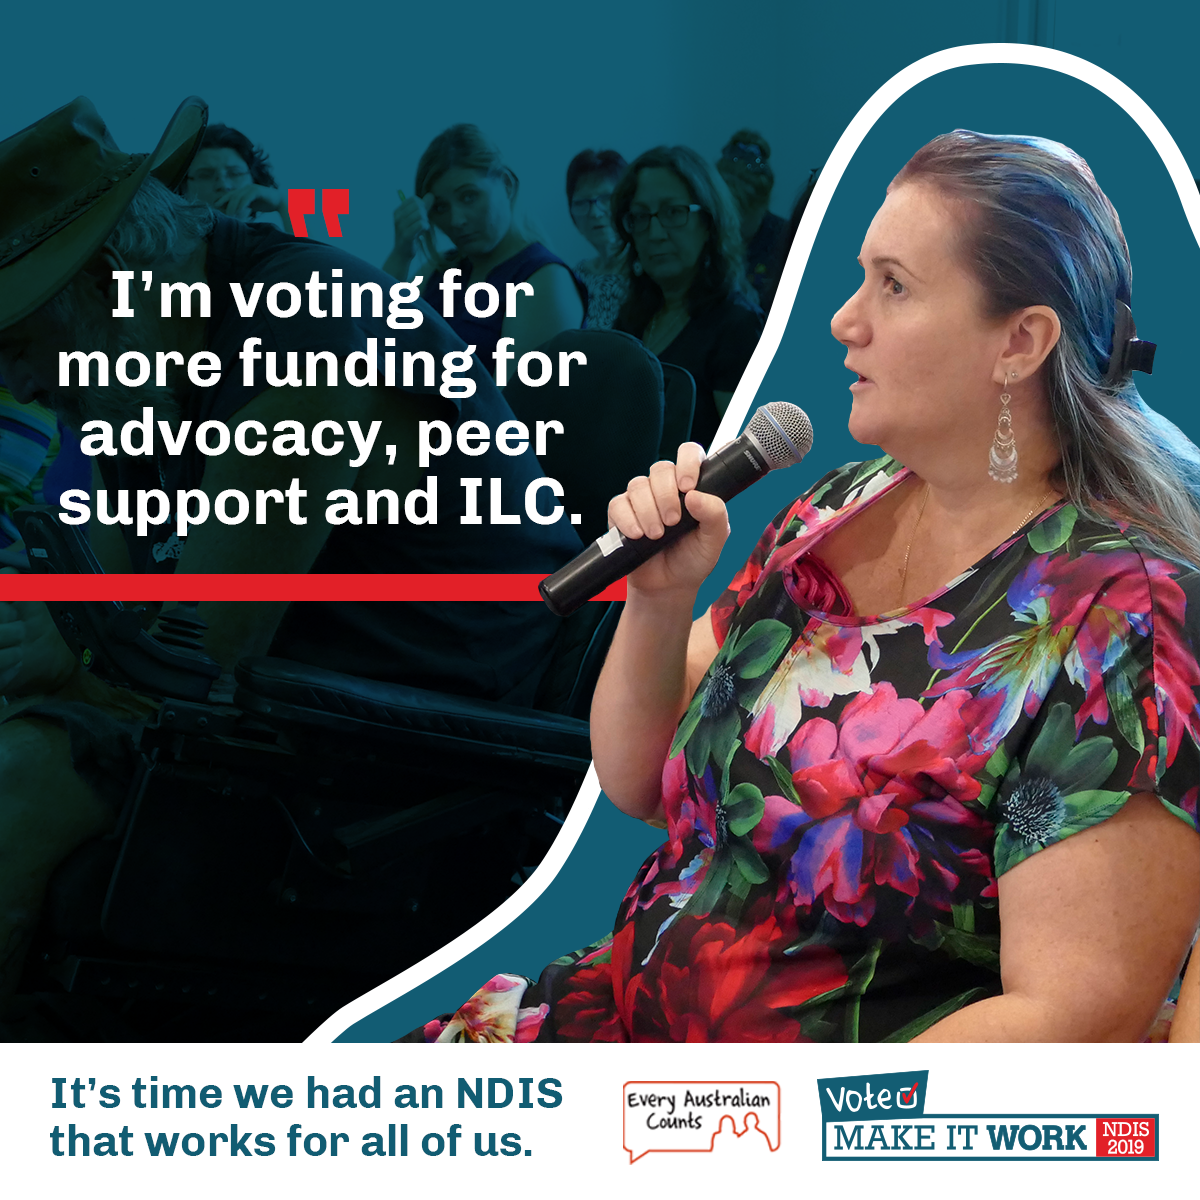 Sharegraphic - I'm voting for more funding for advocacy, peer support and ILC